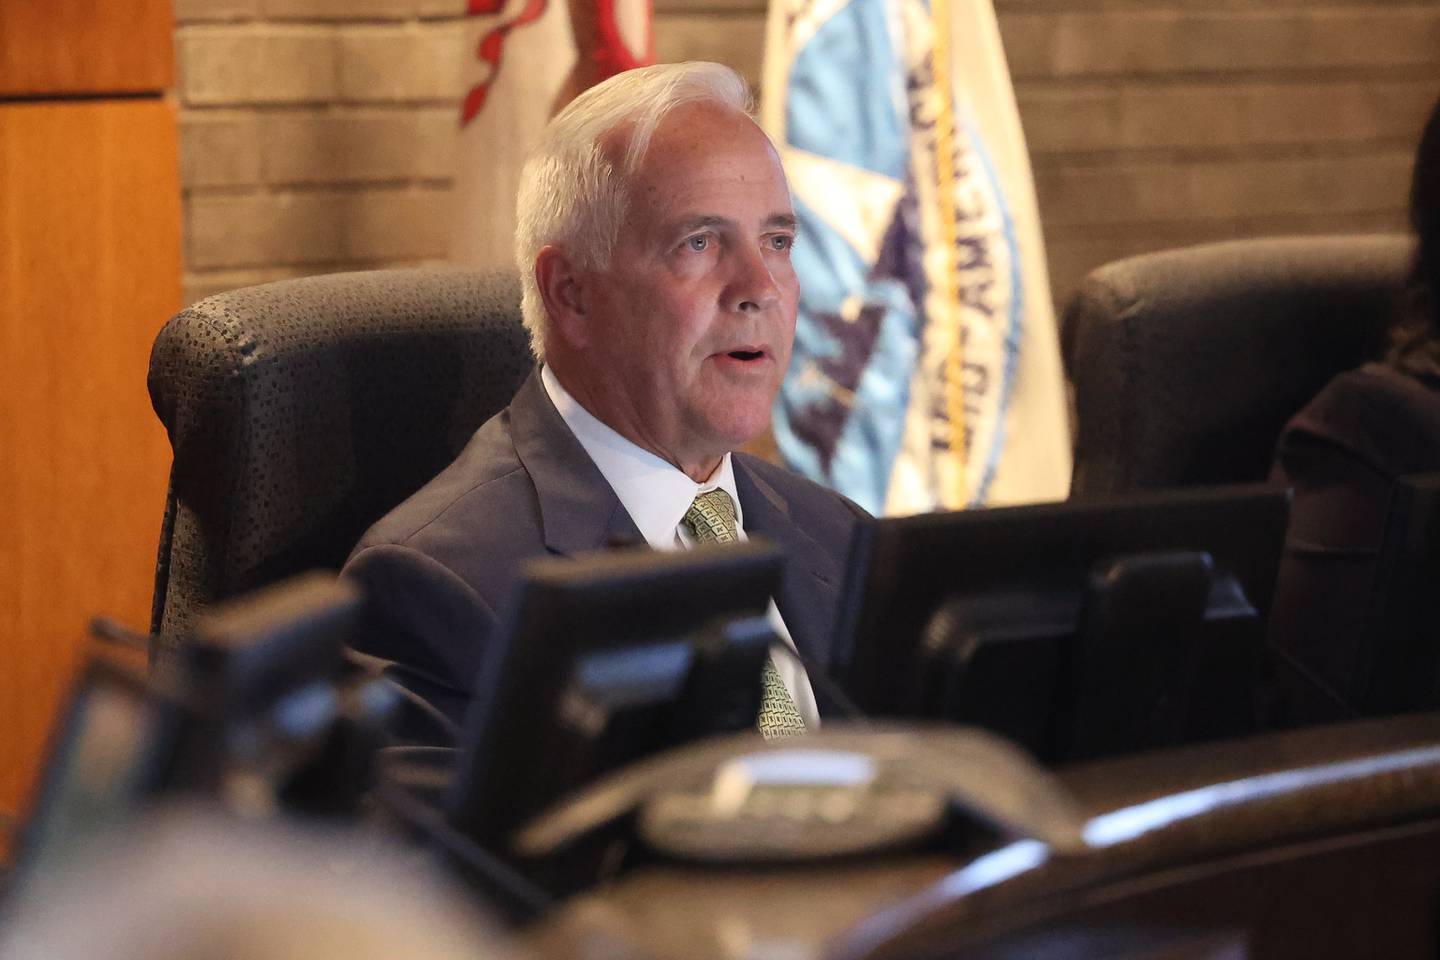 Mayor Terry D’Arcy addresses the public saying he did not approve, agree to or sign a grant agreement to help asylum seekers at the Joliet City Council Meeting on Tuesday, Oct. 3, 2023 in Joliet.